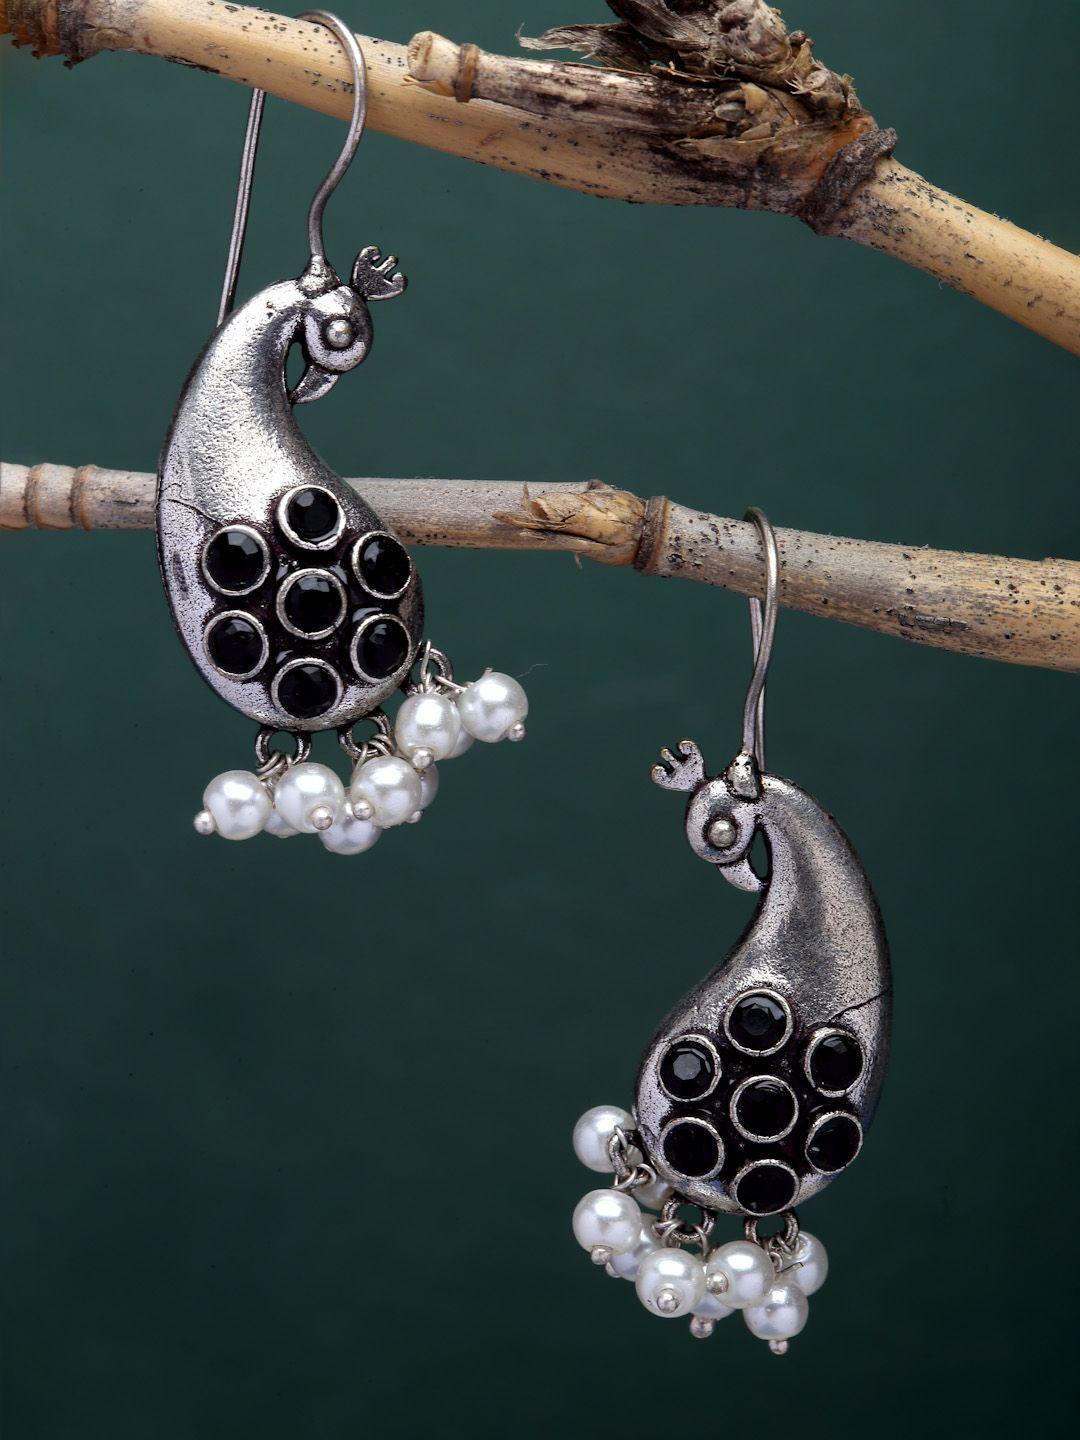 sanjog women oxidized silver-plated peacock shaped artificial stones & beads drop earrings